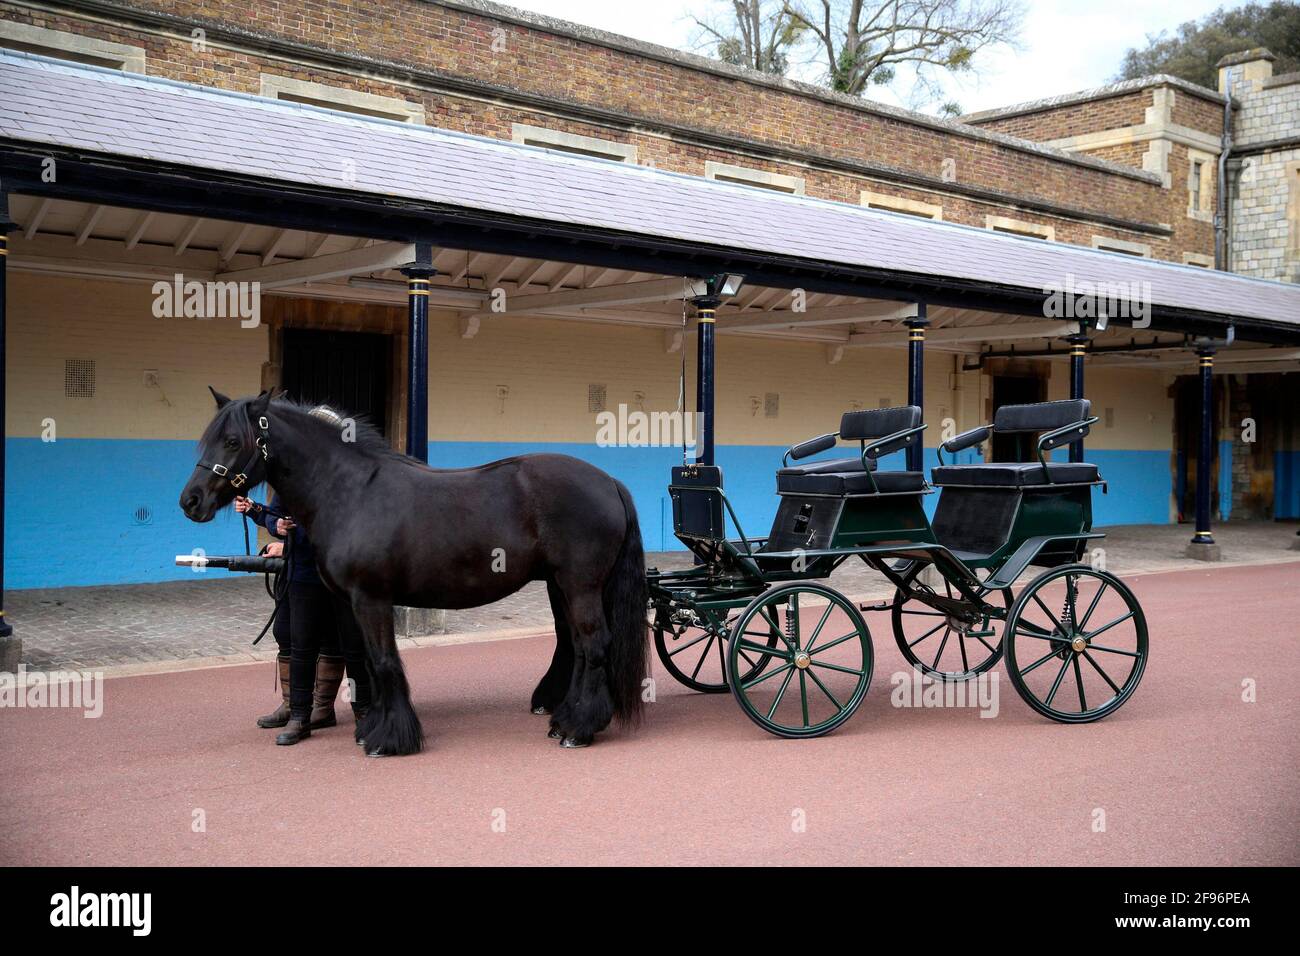 The Duke of Edinburgh's driving carriage and his two Fell ponies, Balmoral Nevis and Notlaw Storm, pictured at Windsor Castle, Berkshire. The Duke's love of carriage-driving is to be a central feature of his funeral on Saturday when the carriage and ponies will be present with two of his grooms in the Quadrangle of Windsor Castle during the procession. The four wheeled carriage was designed by The Duke of Edinburgh eight years ago. Notlaw Storm and Balmoral Nevis, born in 2008 are both Fell ponies, an endangered breed. Balmoral Nevis was bred by The Queen. Issue date: Friday April 15, 2021. Stock Photo